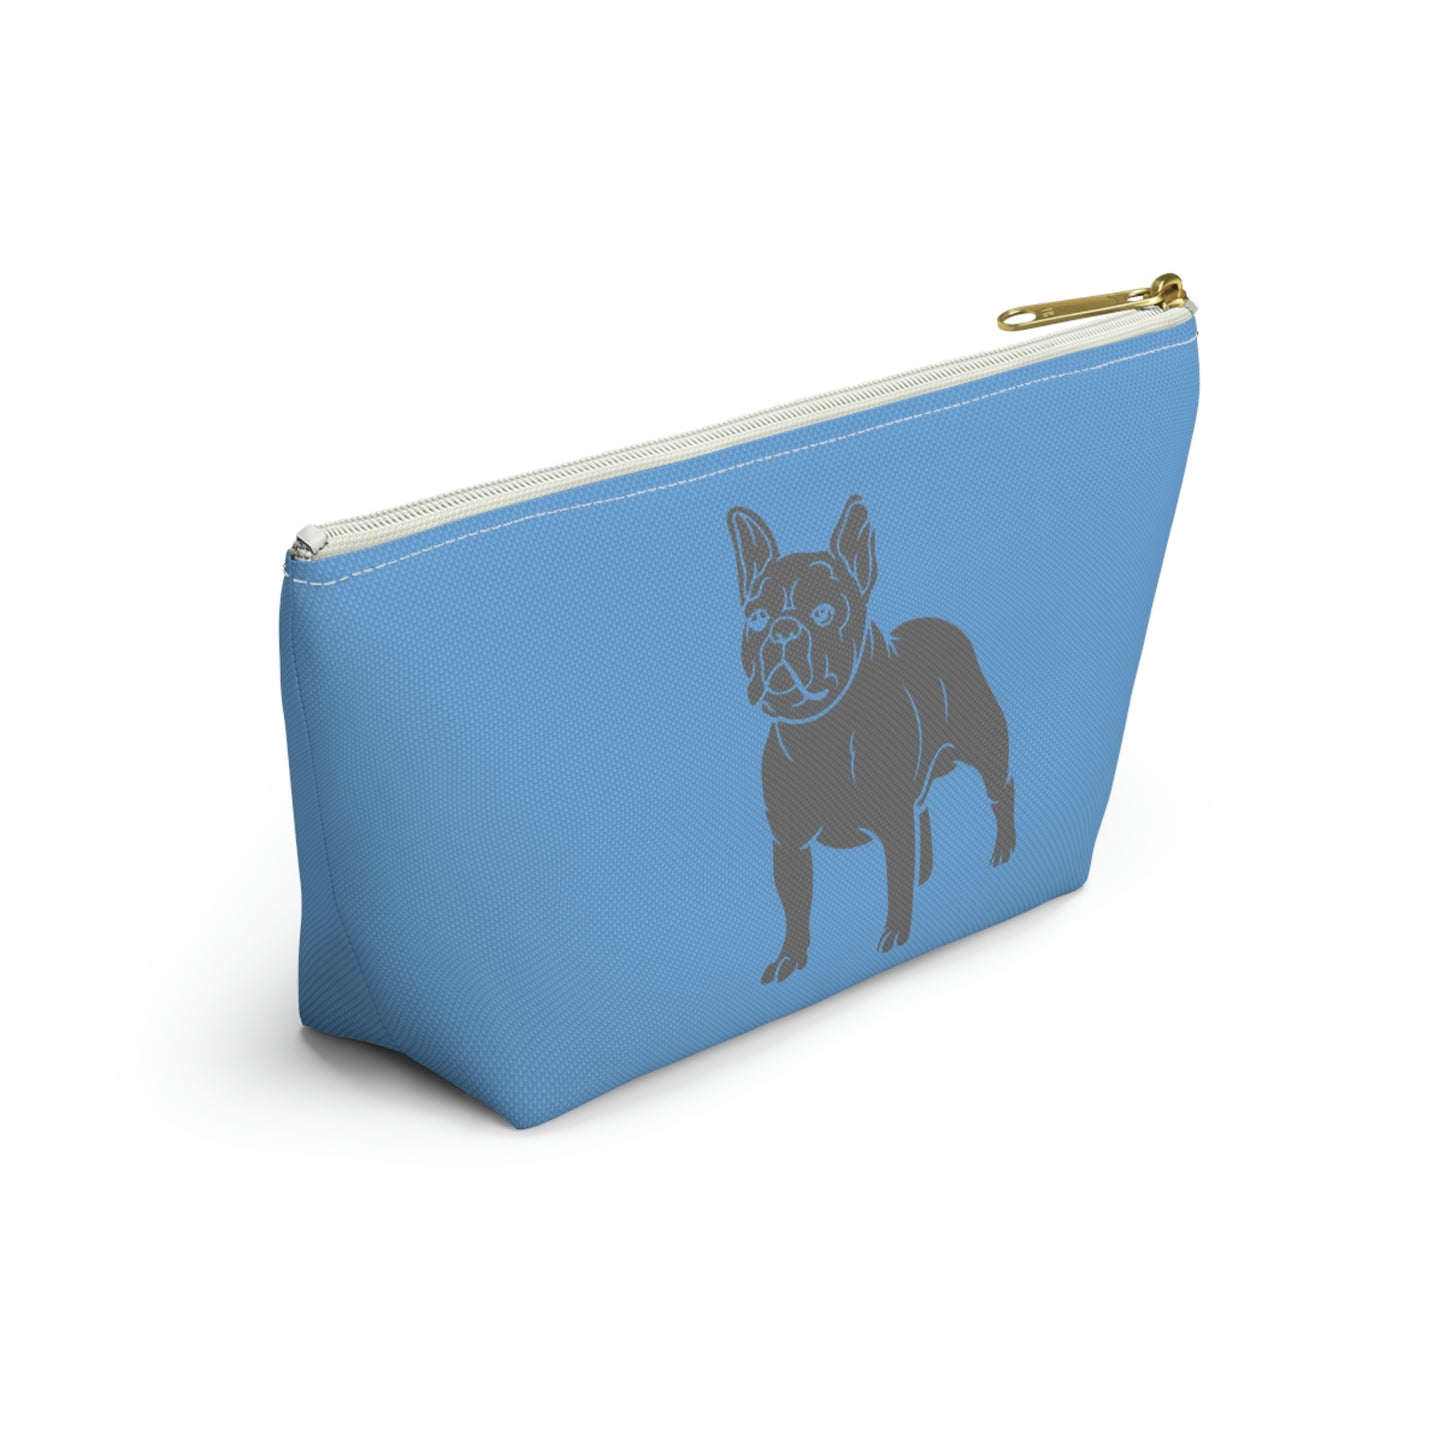 Frenchie Blue Black Accessory Pouch With T-bottom | BKLA | shoes & accessories | backpack, hat, phone cover, tote bags, clutch bags